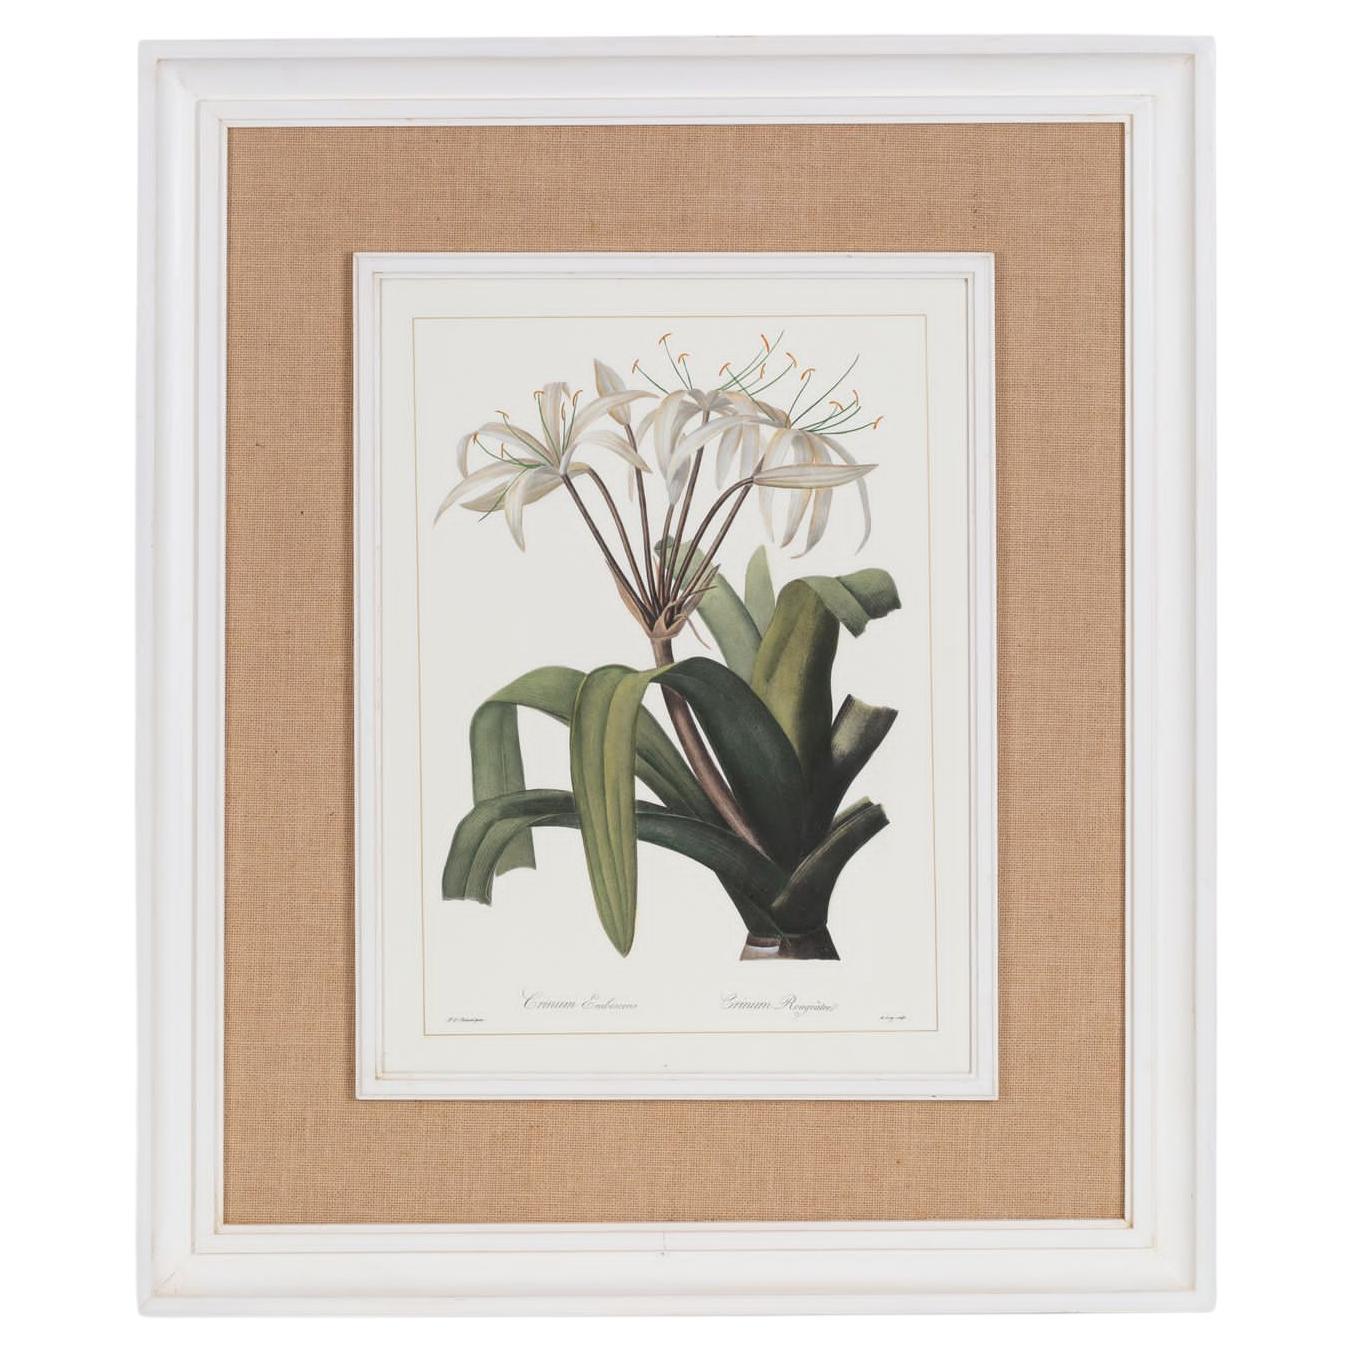 Italian Contemporary HandCrafted Print "Crinum" with Wood and Jute Frame 1 of 2